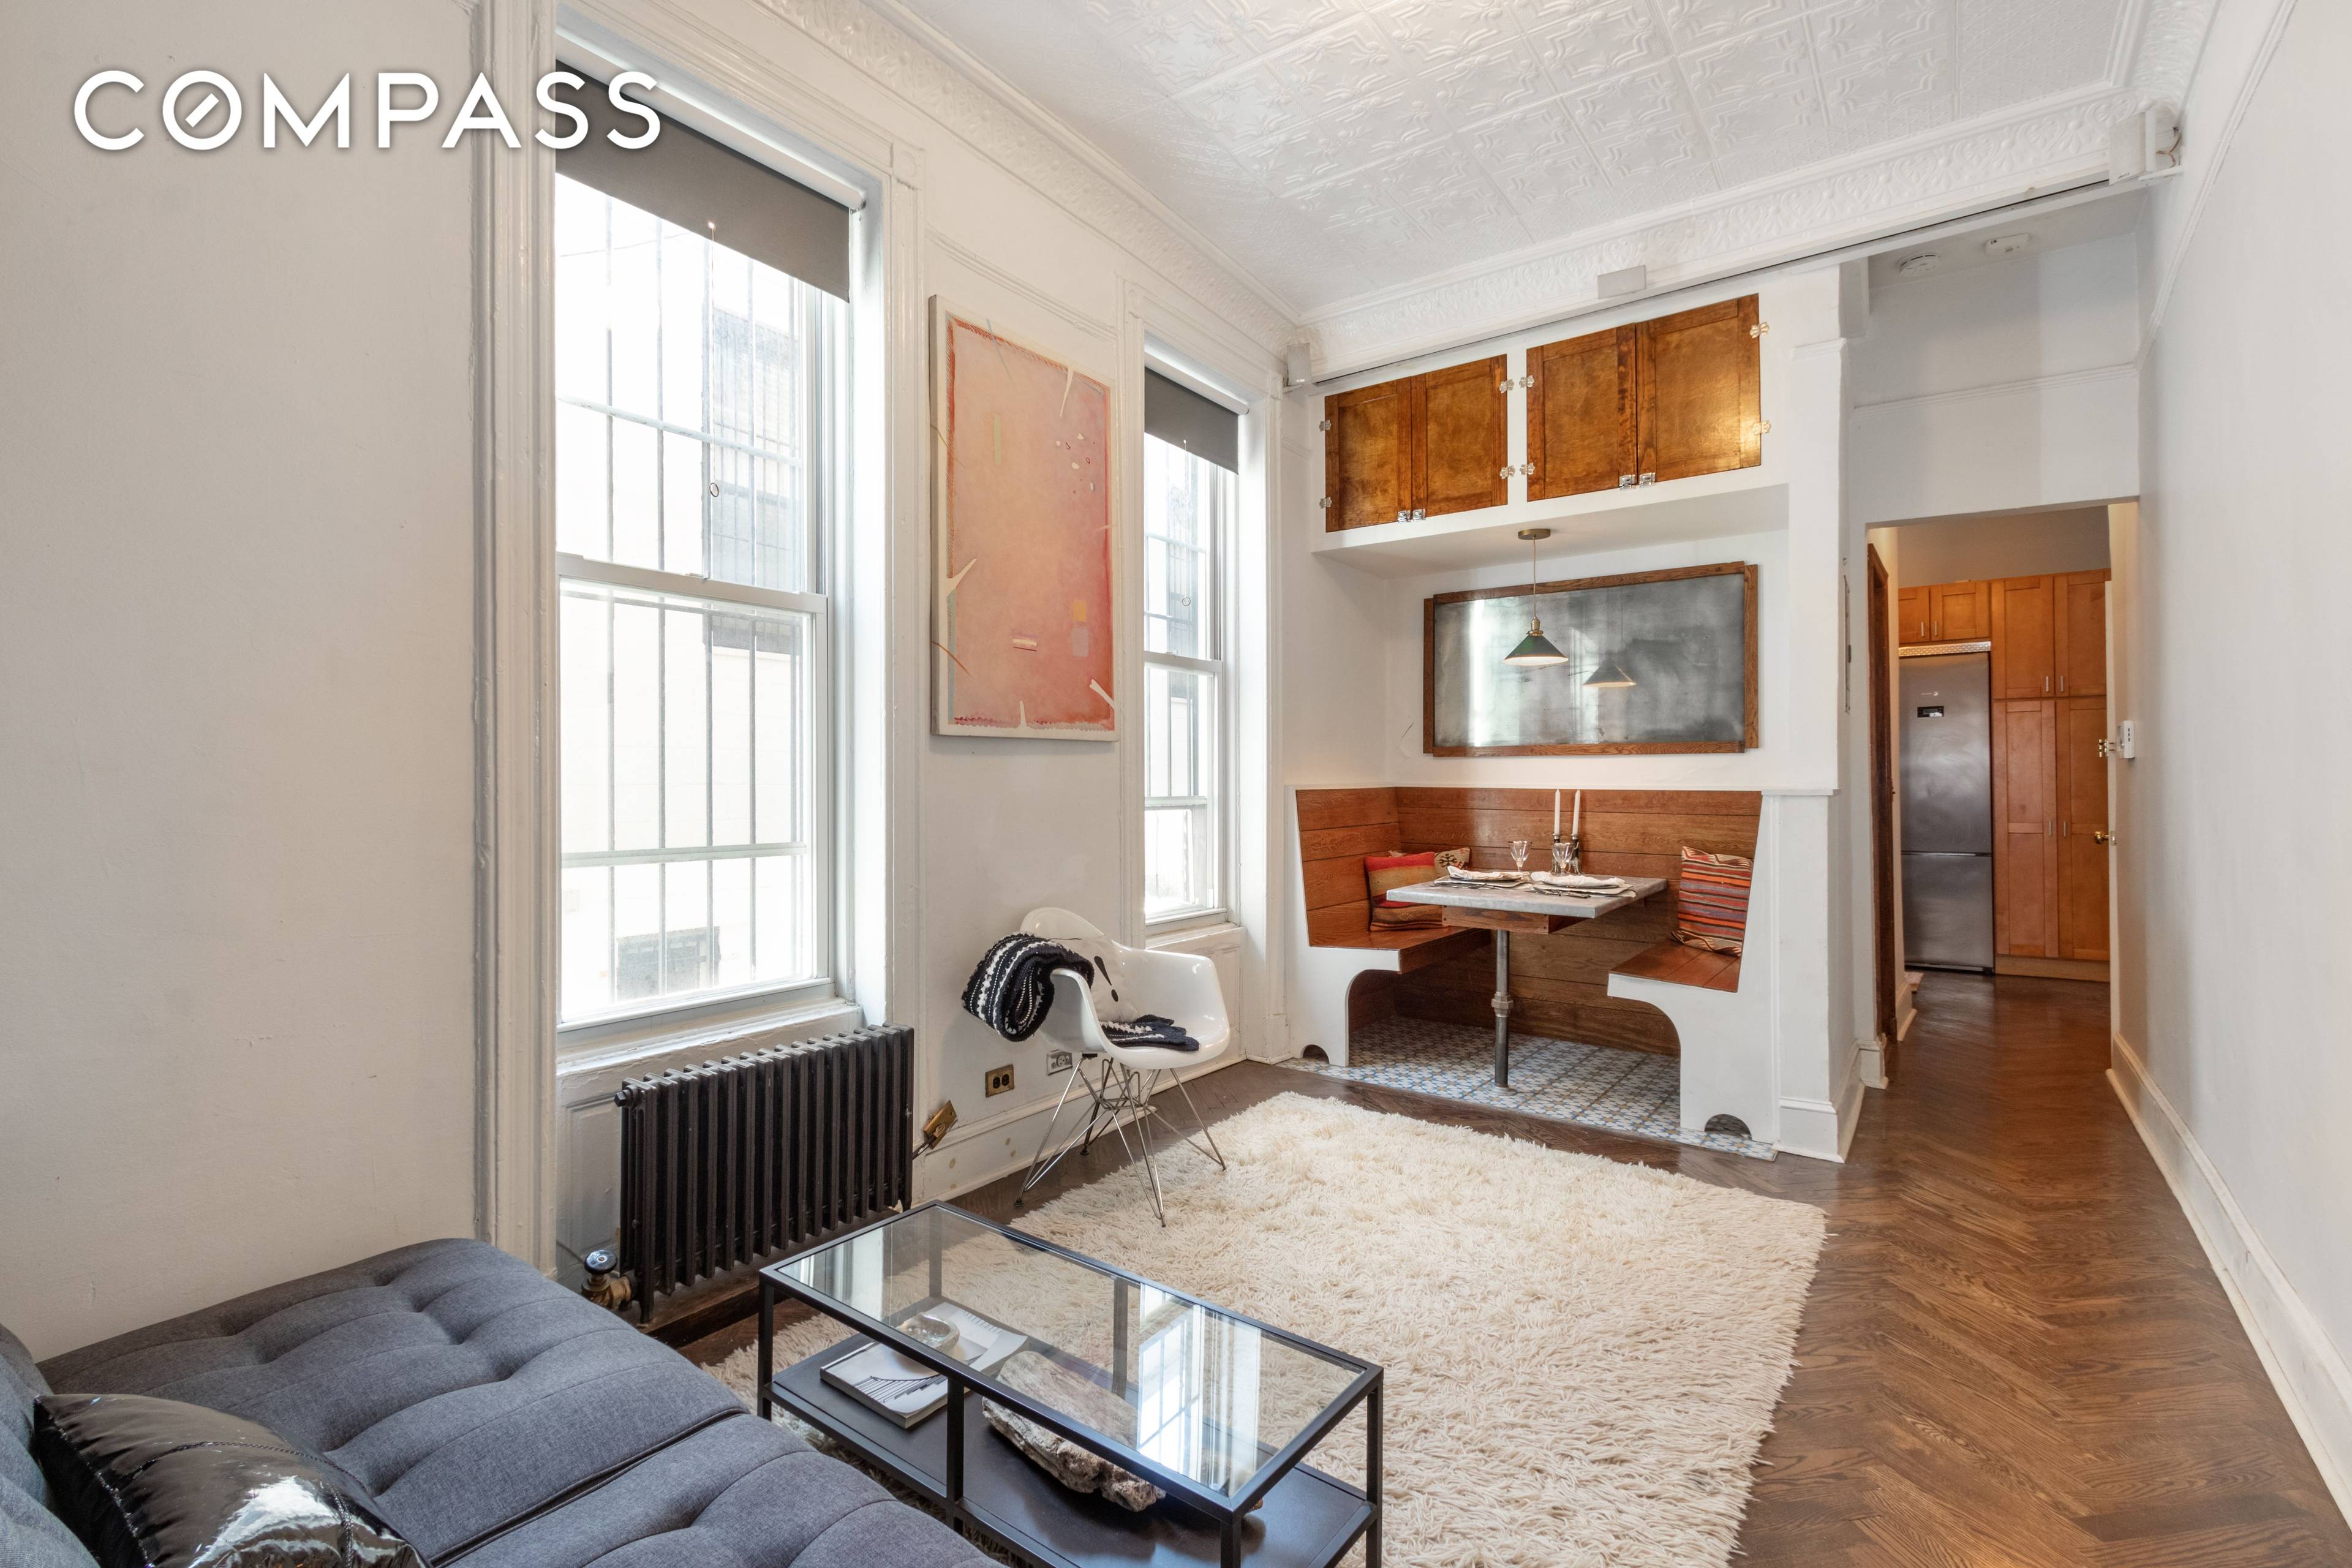 Welcome to 252 Greene Avenue 1C a thoughtfully designed one bedroom condo located on one of the most beautiful blocks in Clinton Hill.